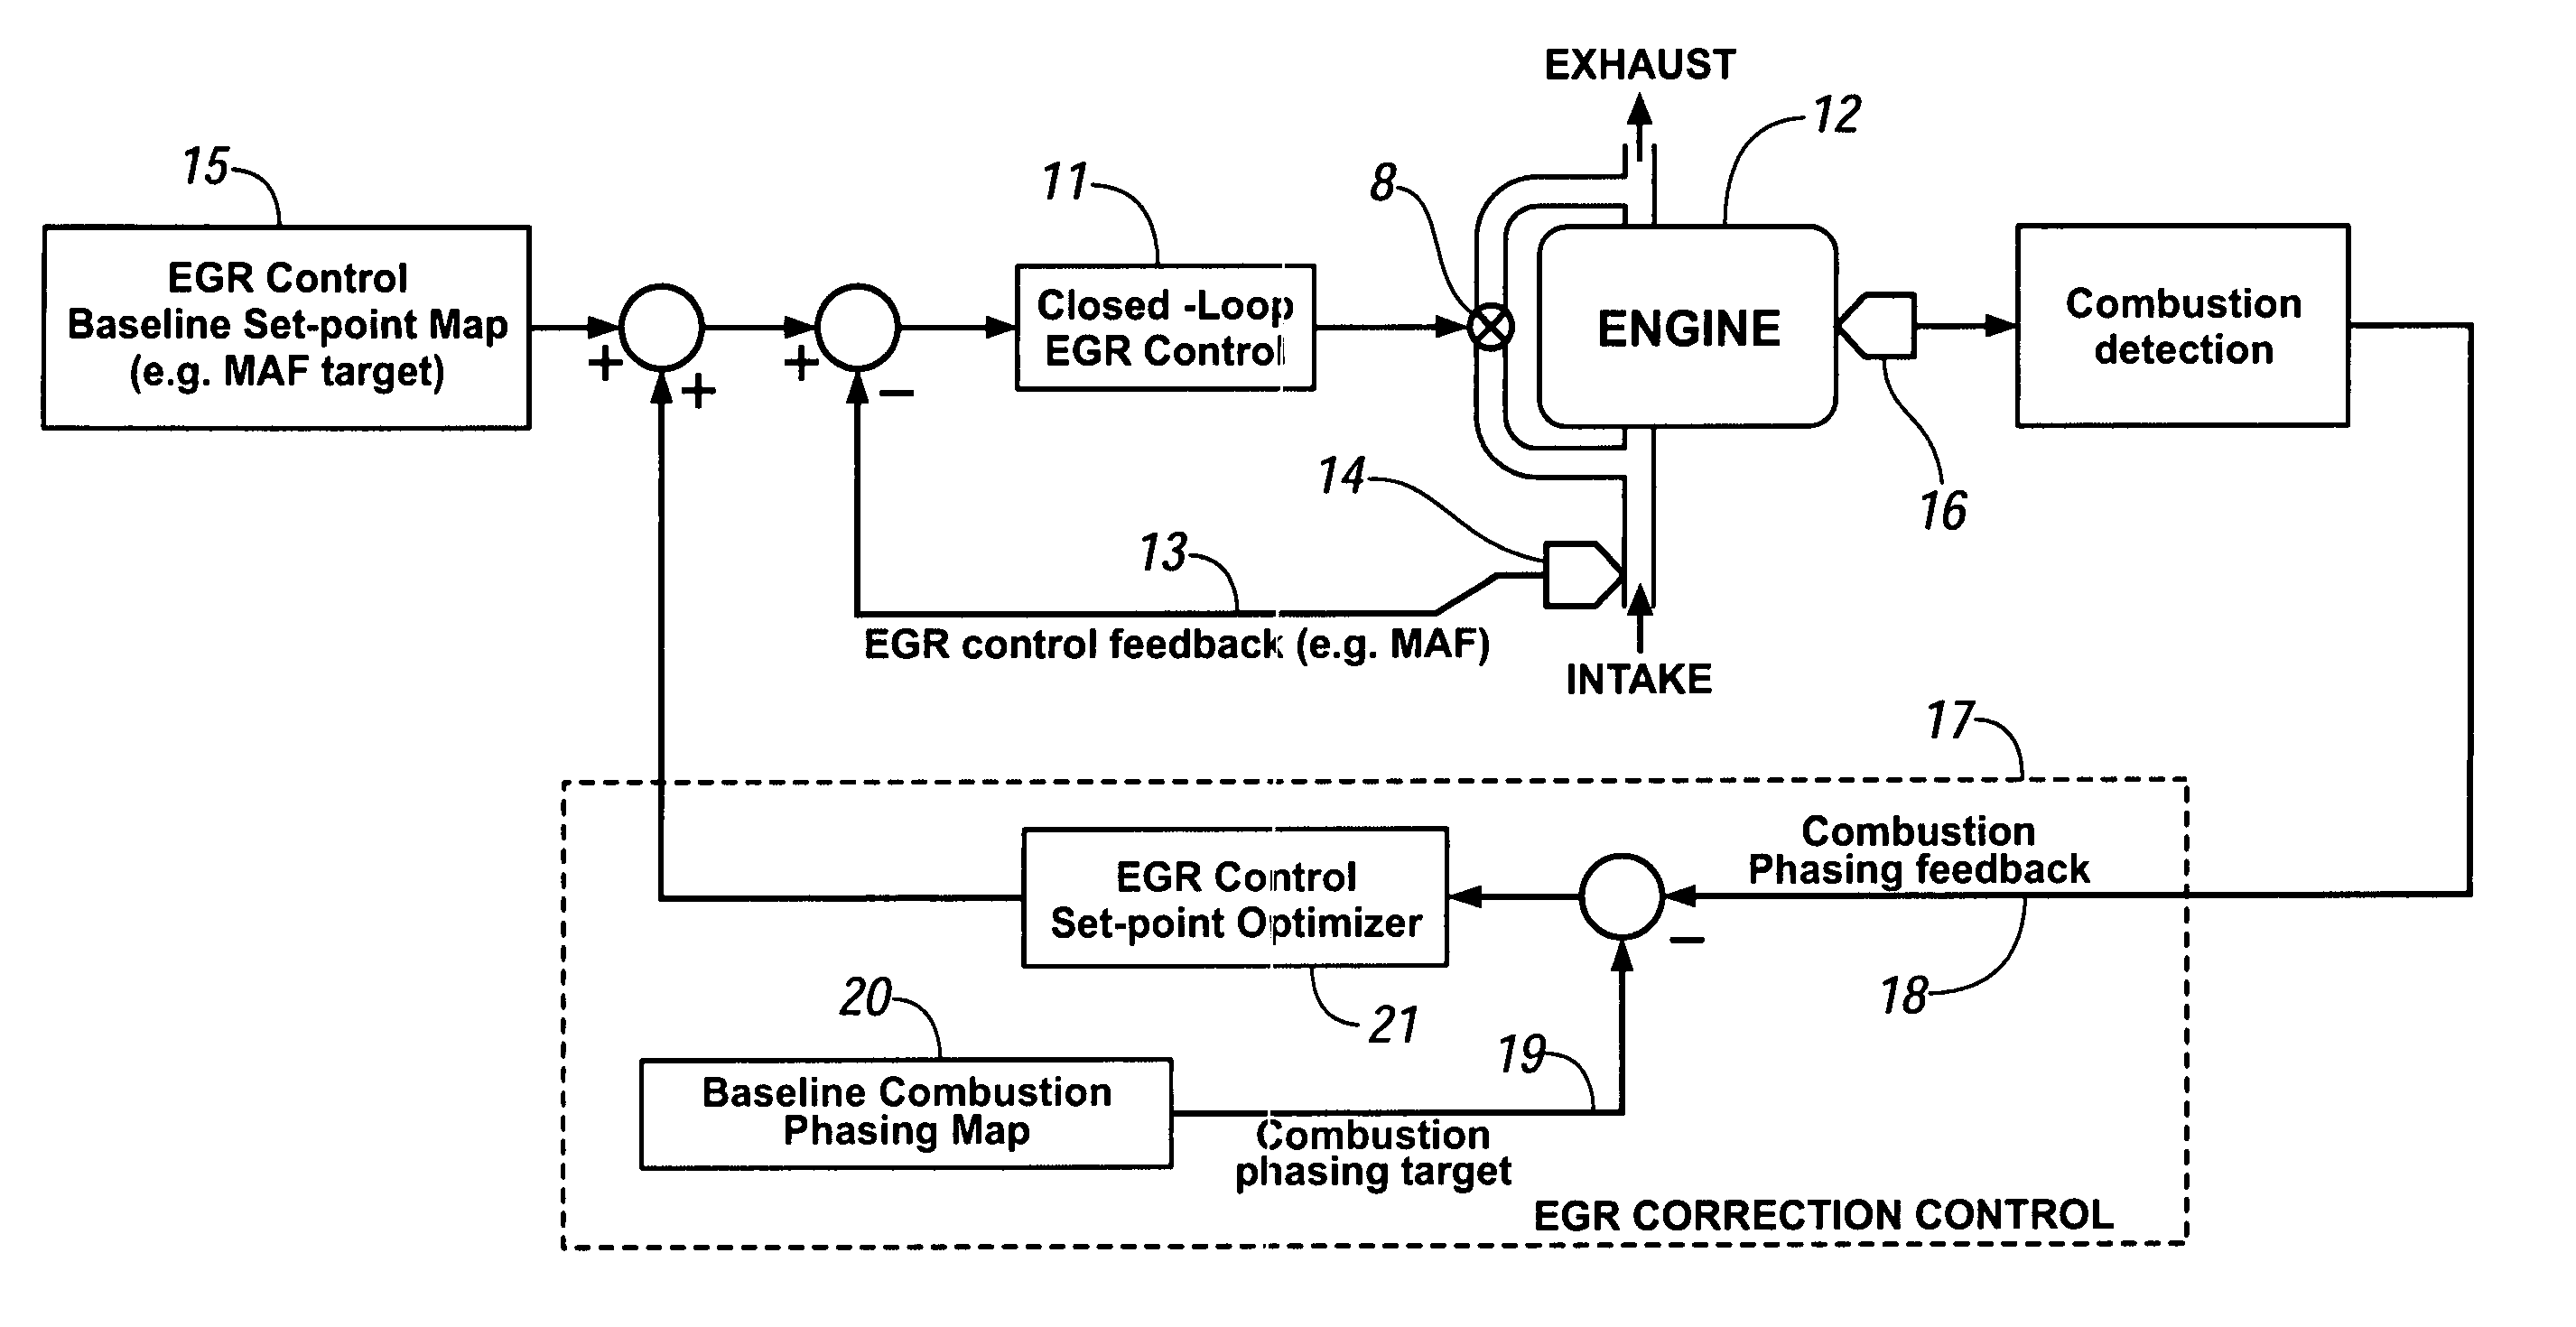 Simultaneous EGR correction and individual cylinder combustion phase balancing